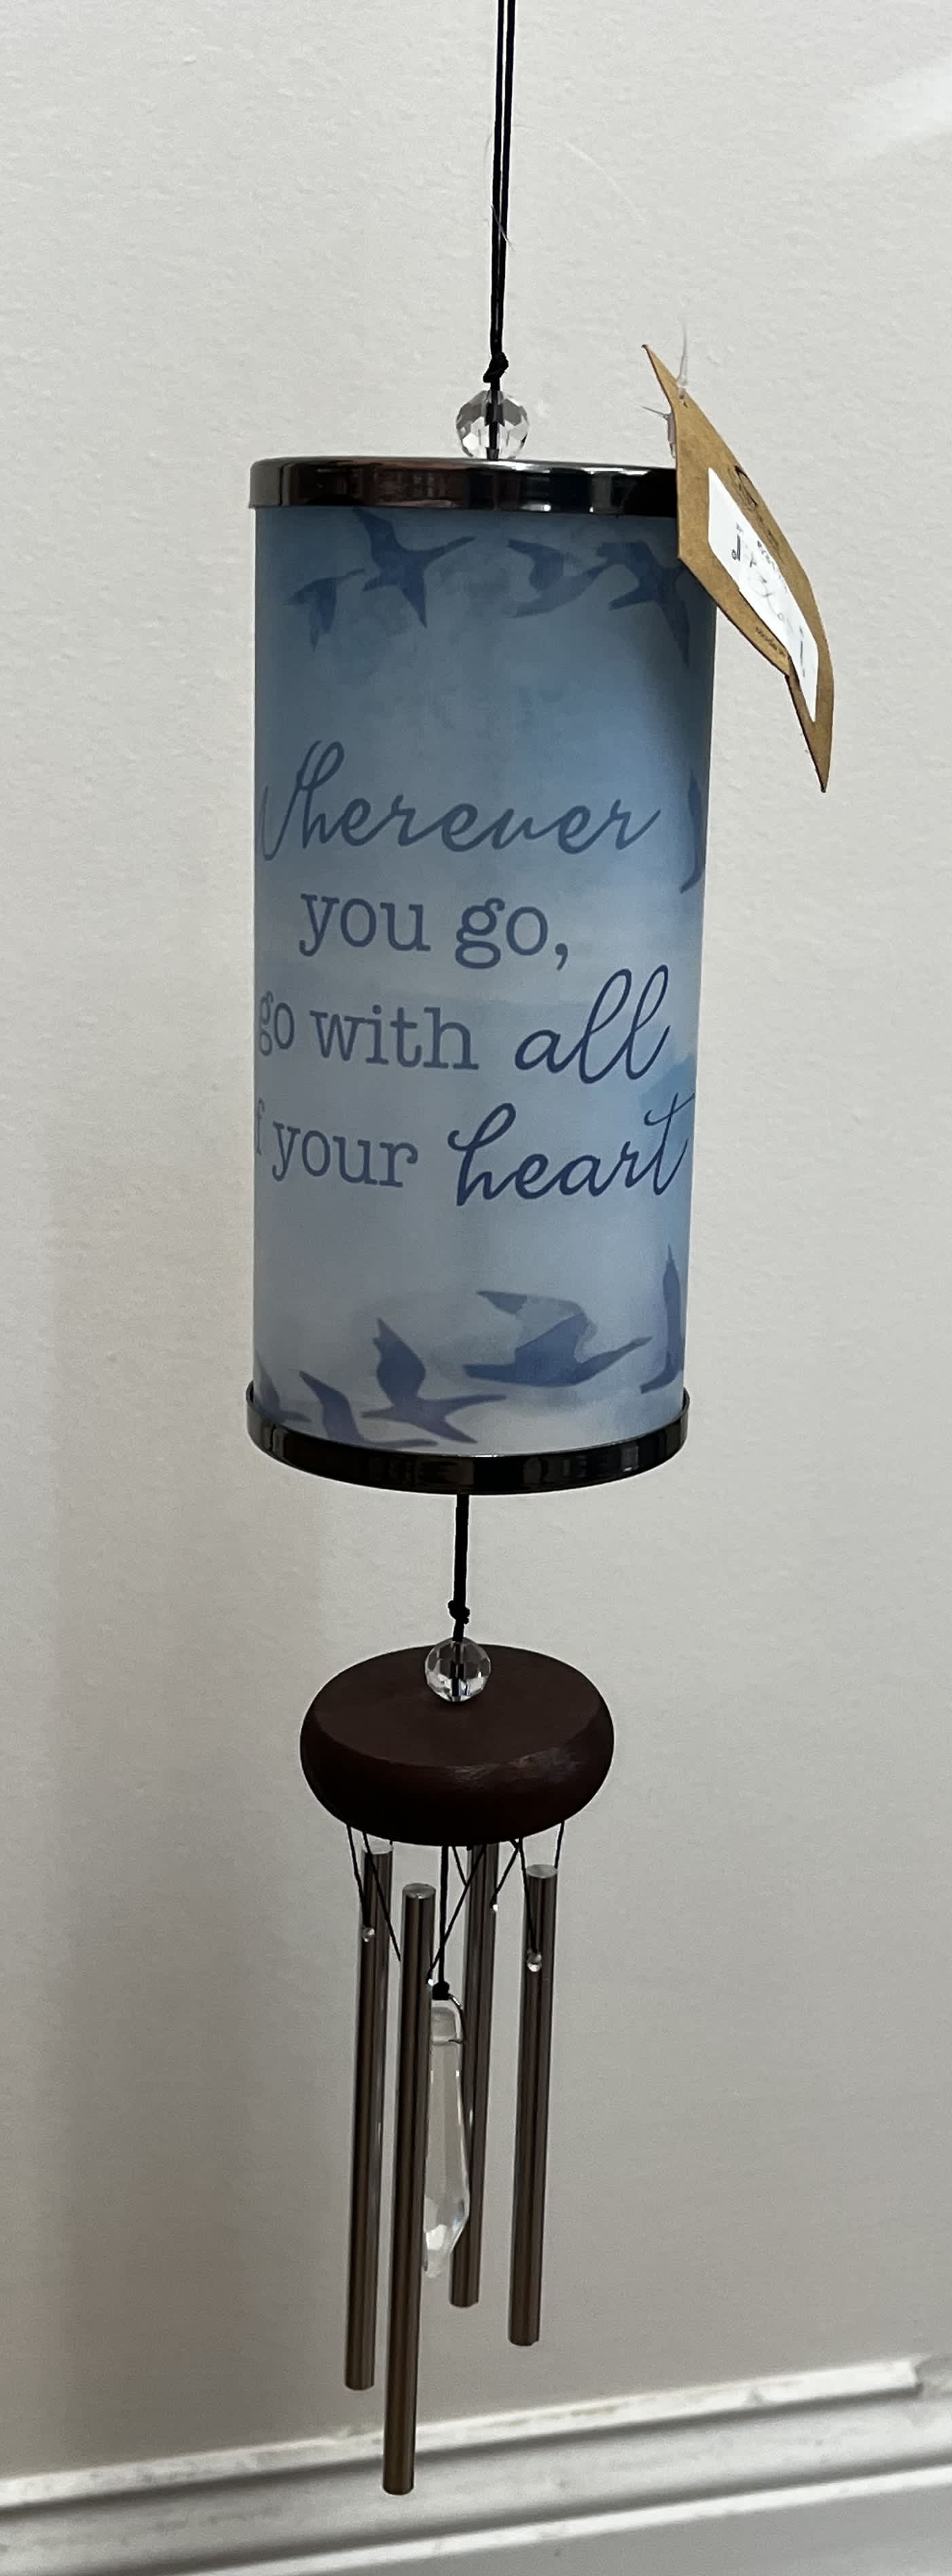 “Wherever you go” Wind Chime - Blue wind chime with birds. “Wherever you go, go with all of your heart” saying.